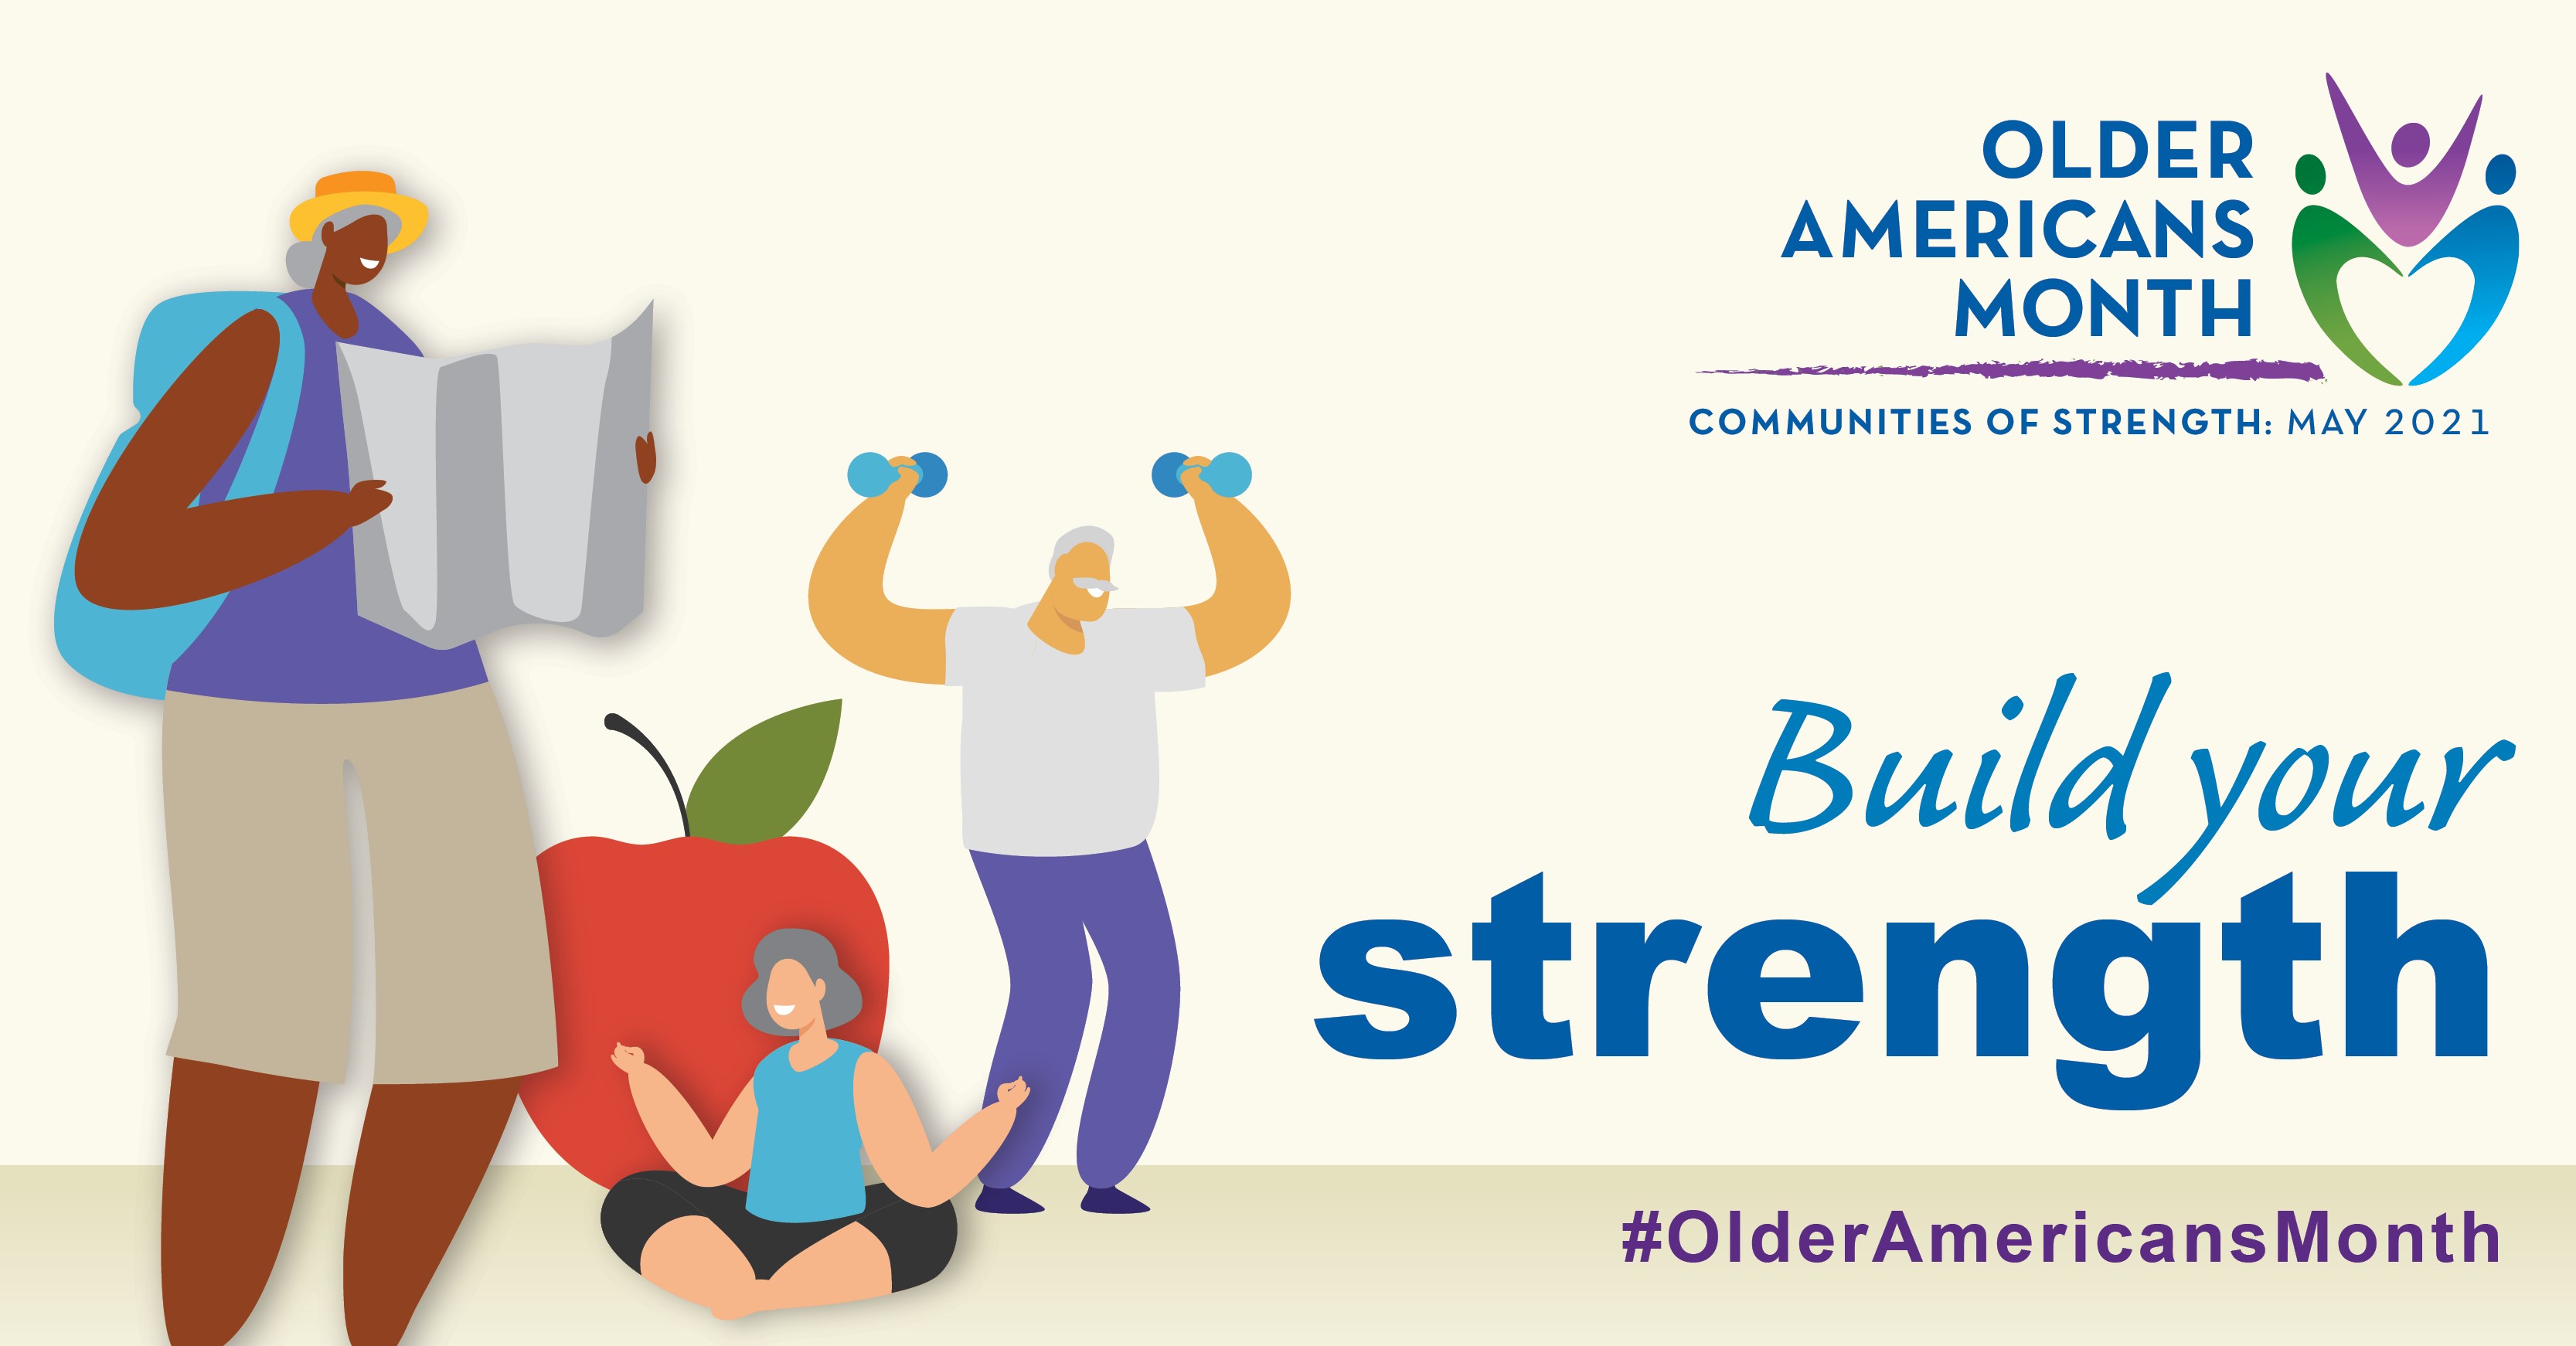 Social Media Graphic: Communities of Strength, Older Americans Month, May 2021. Build your strength. #OlderAmericansMonth